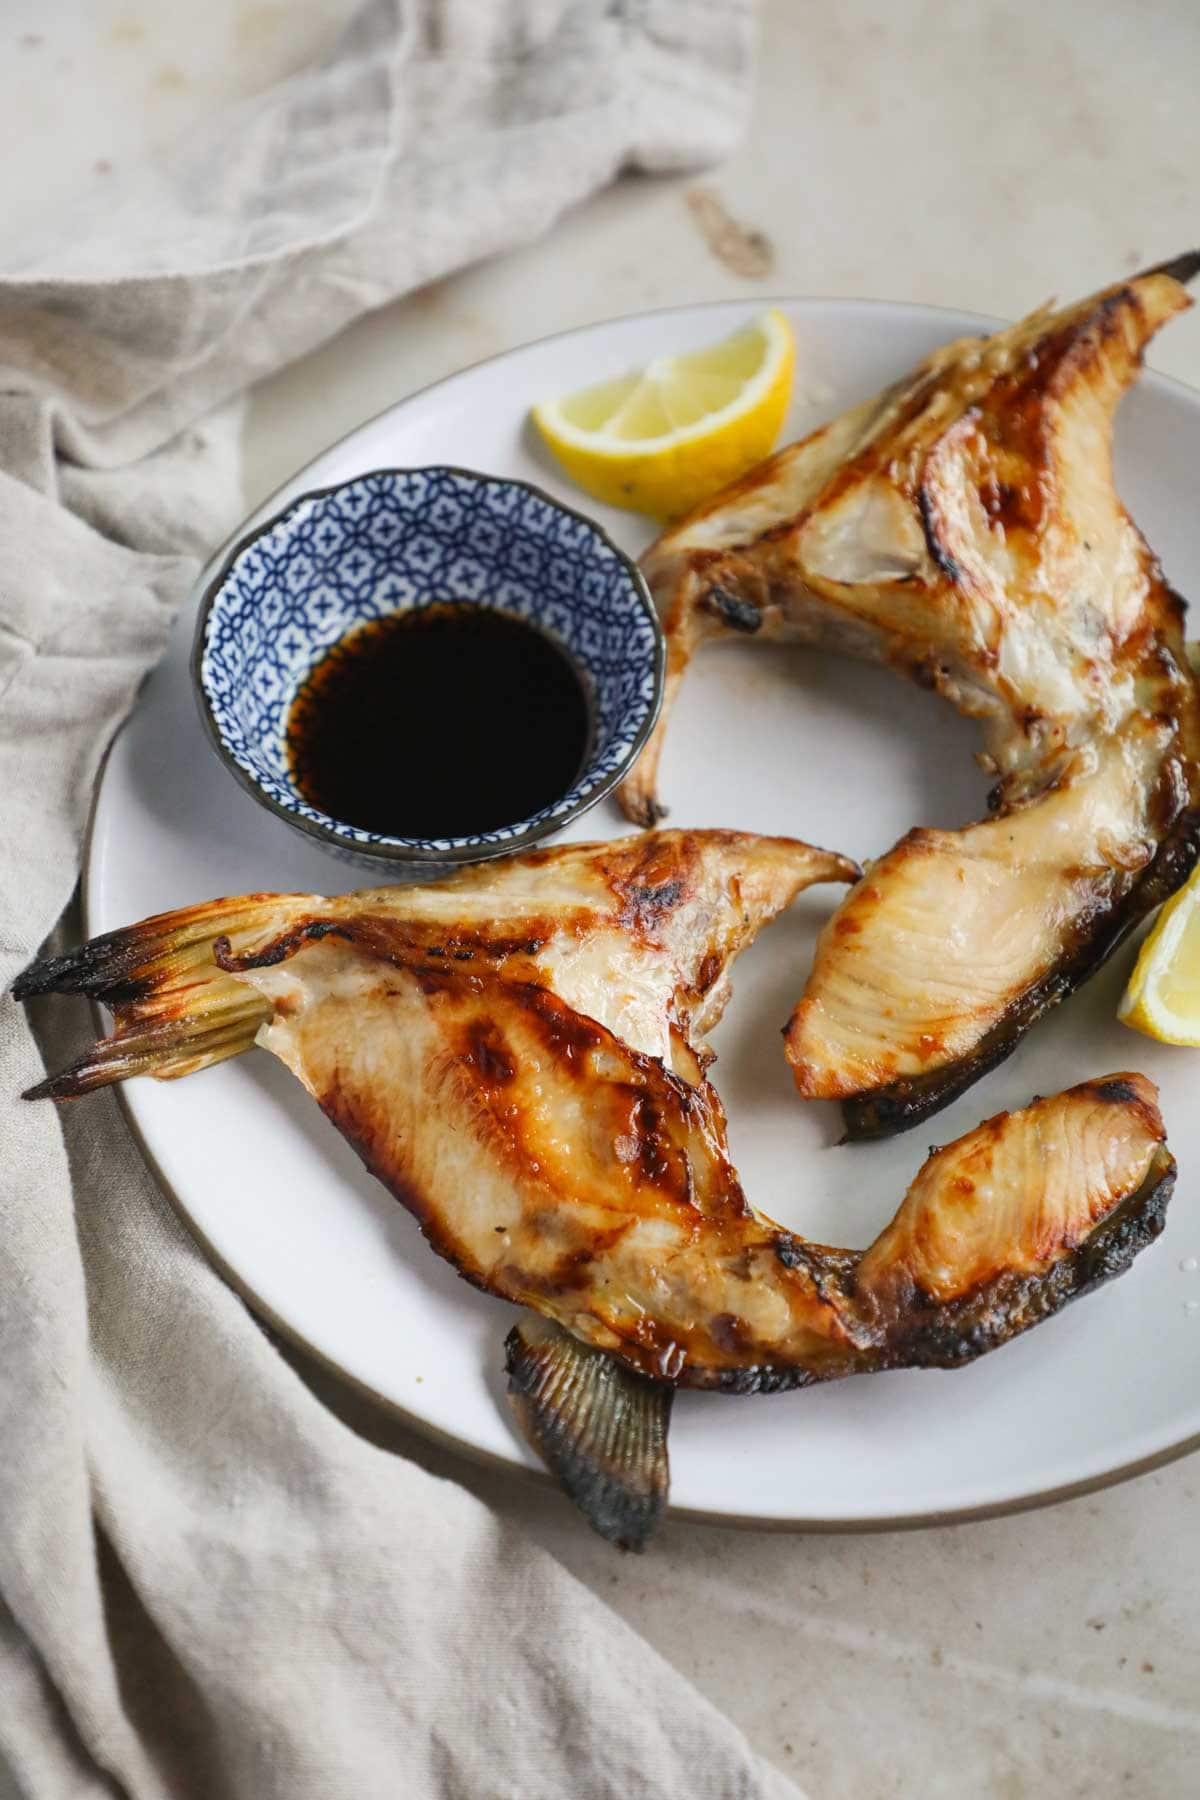 Broiled Japanese hamachi kama (yellowtail collar) with mirin, lemon juice, and soy sauce on a plate.